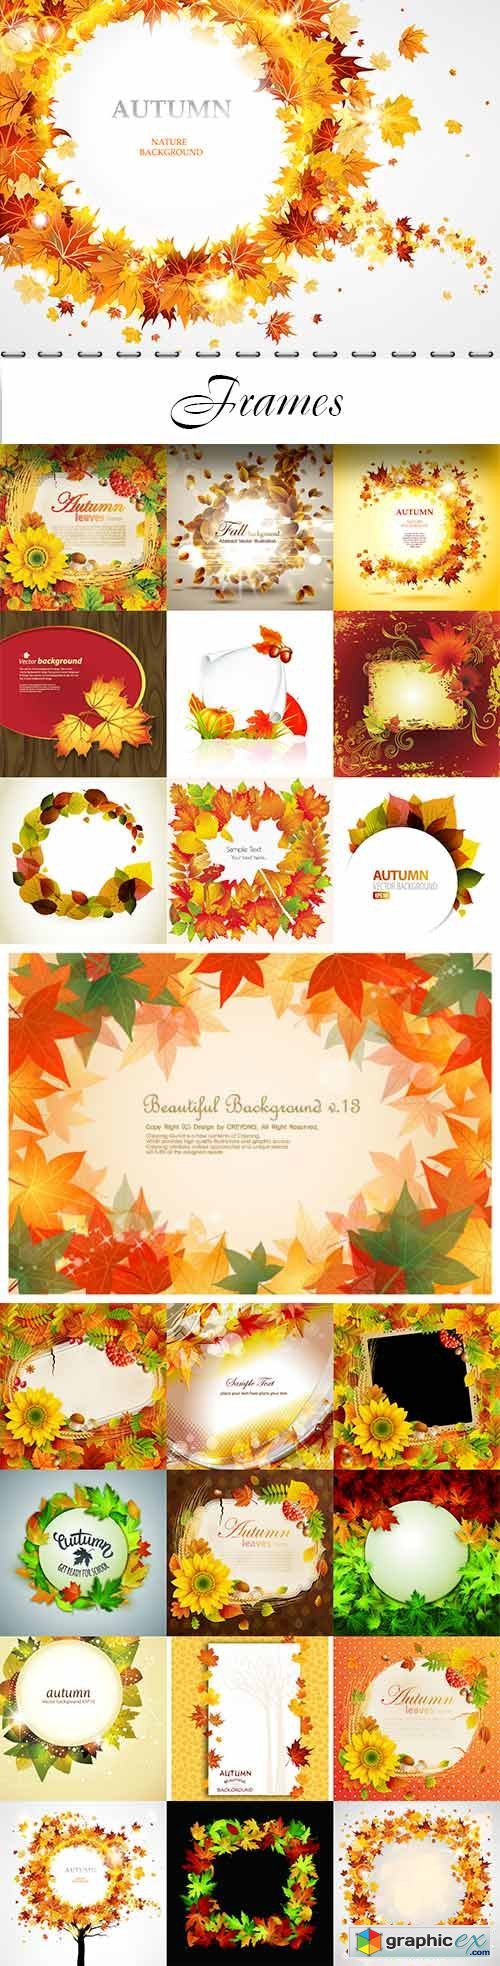 Autumn vector backgrounds collection - Frames